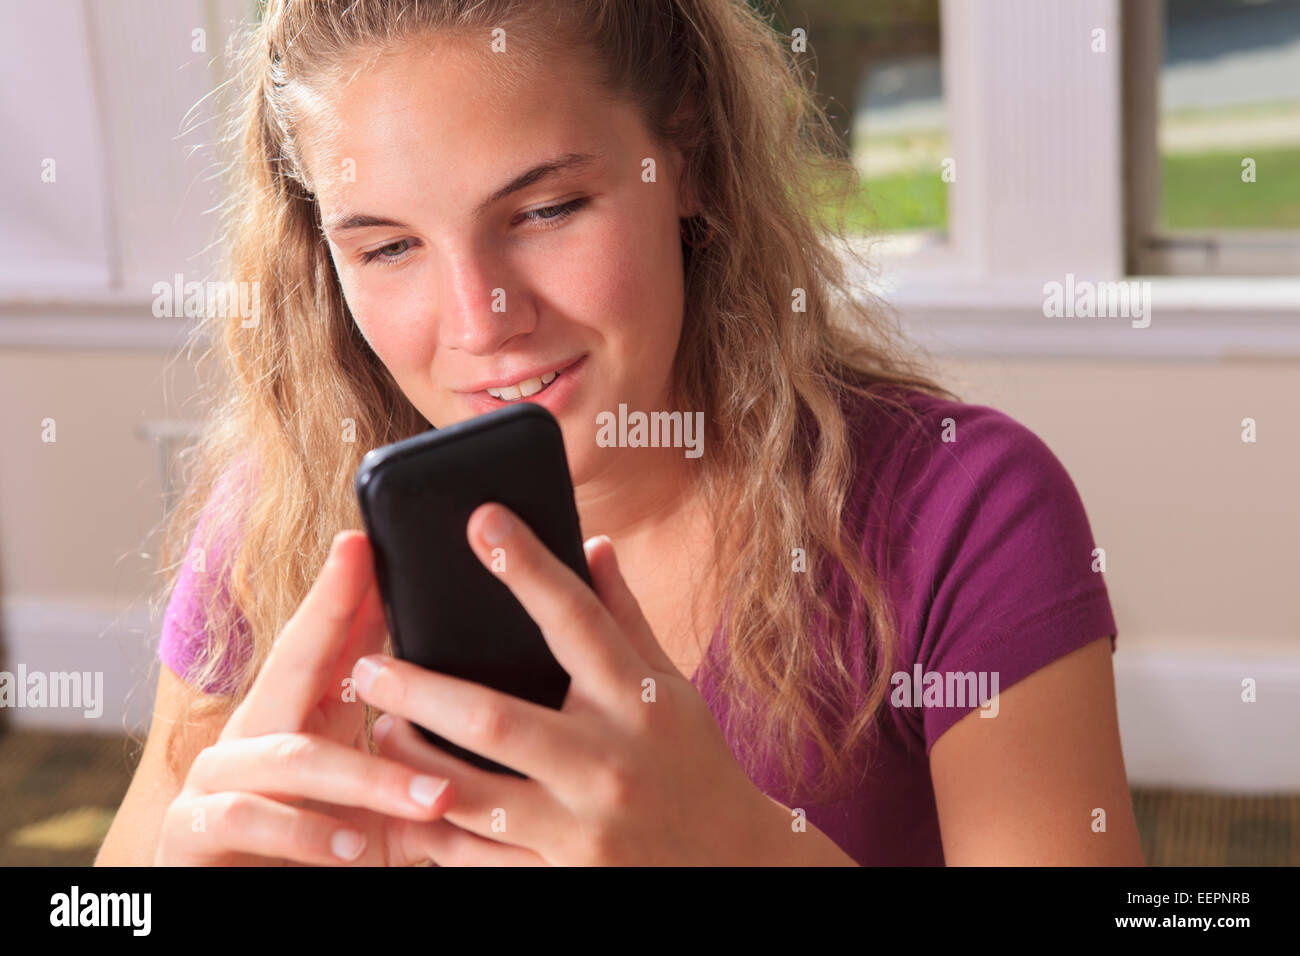 Student with visual impairment using her cell phone in her dorm room Stock Photo